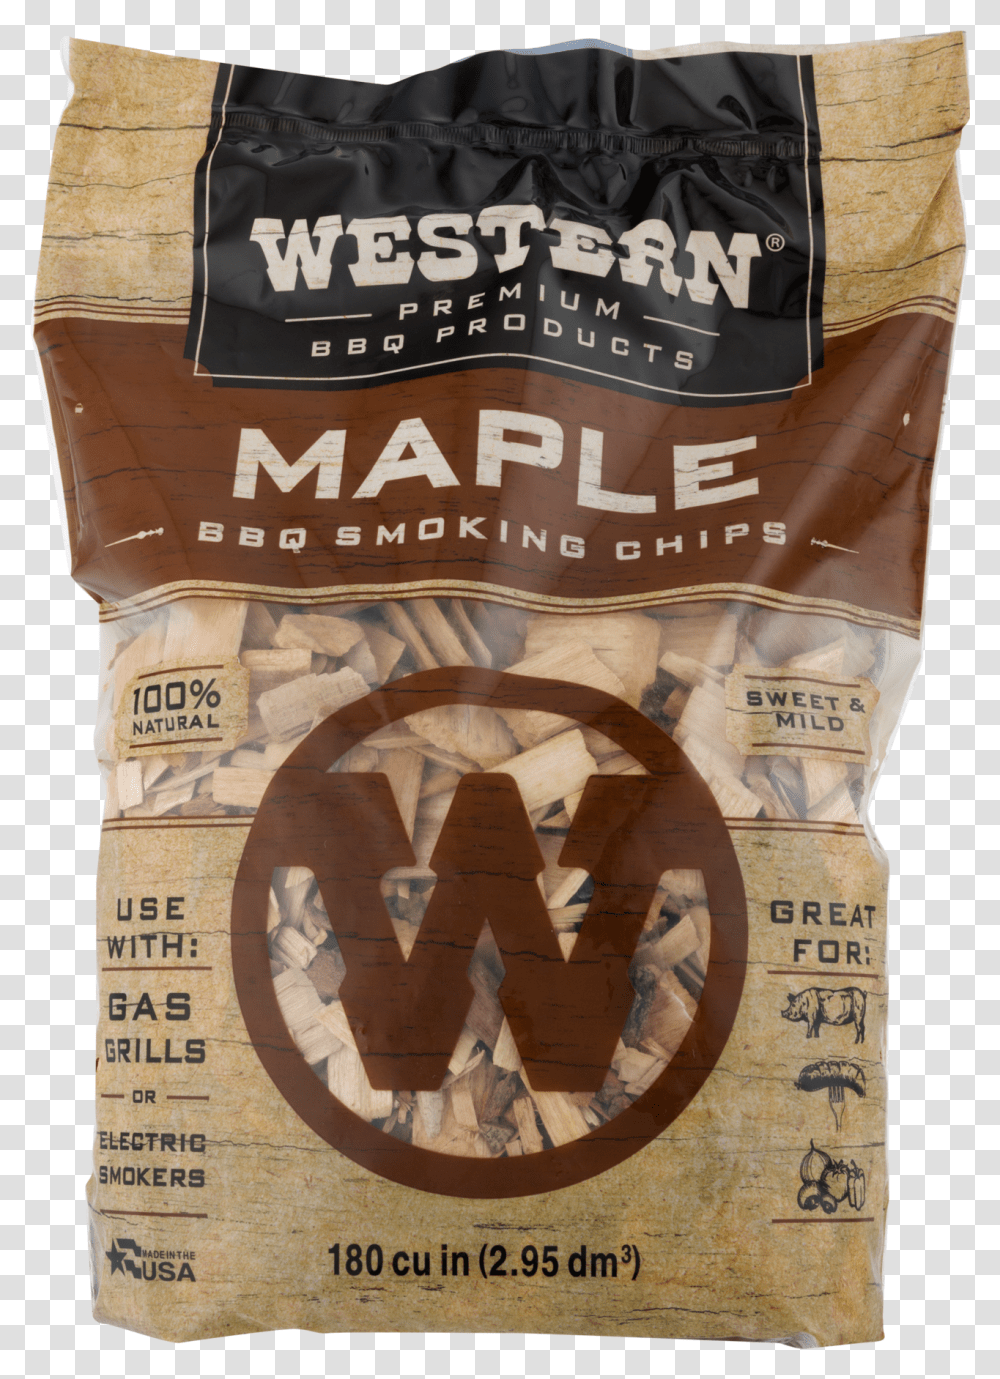 Western Premium Bbq Products Maple Smoking Chips 180 Cu In Walmartcom Hickory Bbq Smoking Chips, Cardboard, Box, Text, Carton Transparent Png